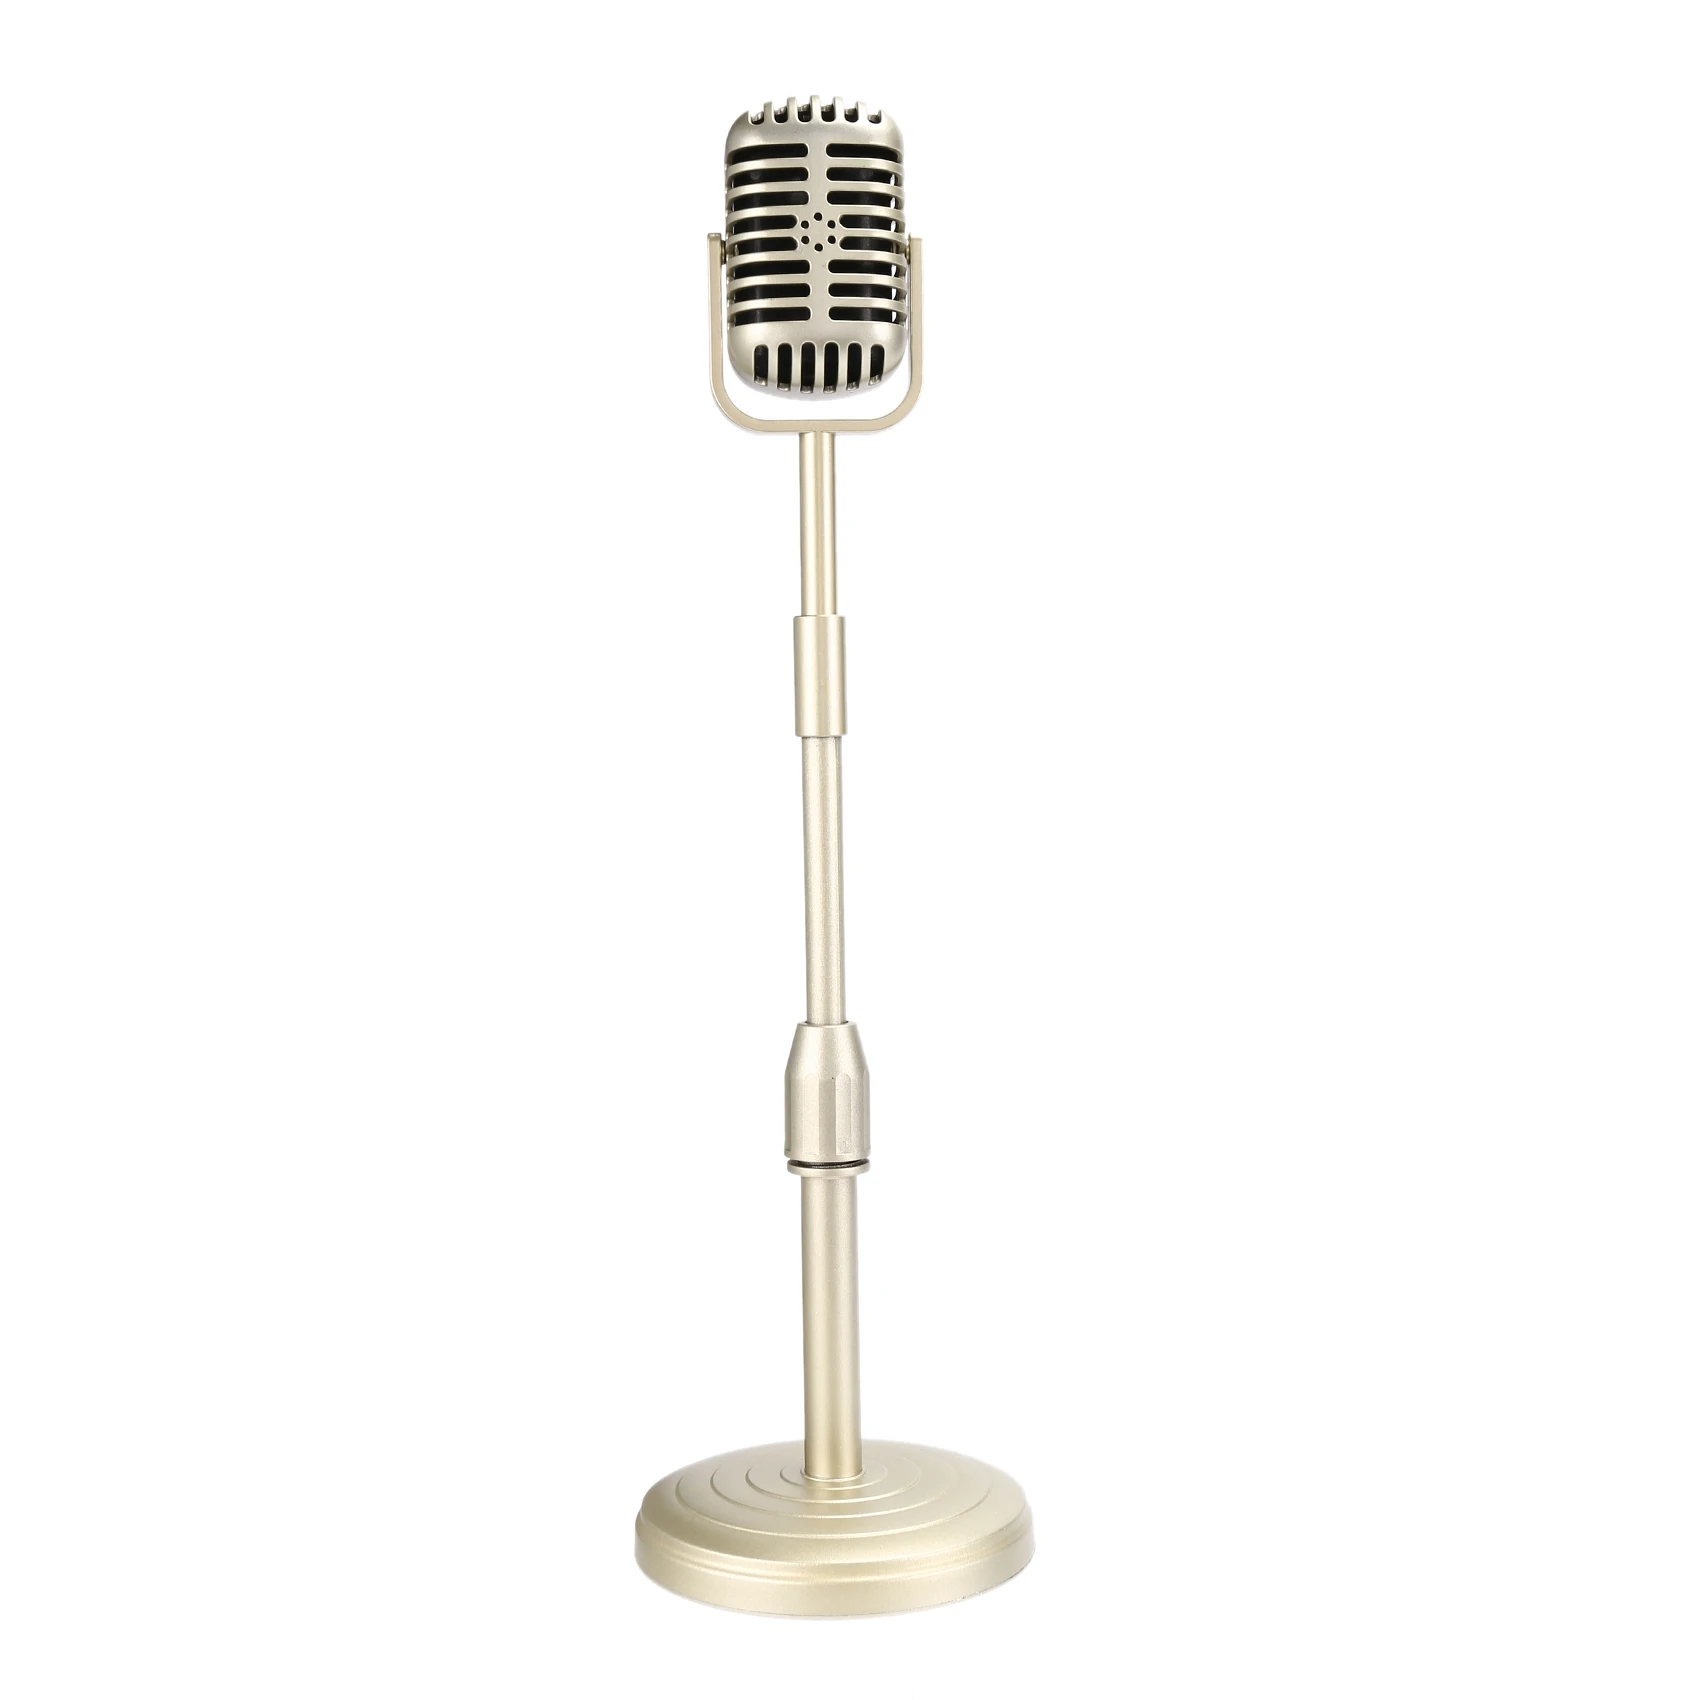 

Vintage Desktop Microphone Prop Model with Adjustable Height, Classic Retro Style Microphone Stand Fake Mic Prop,Gold